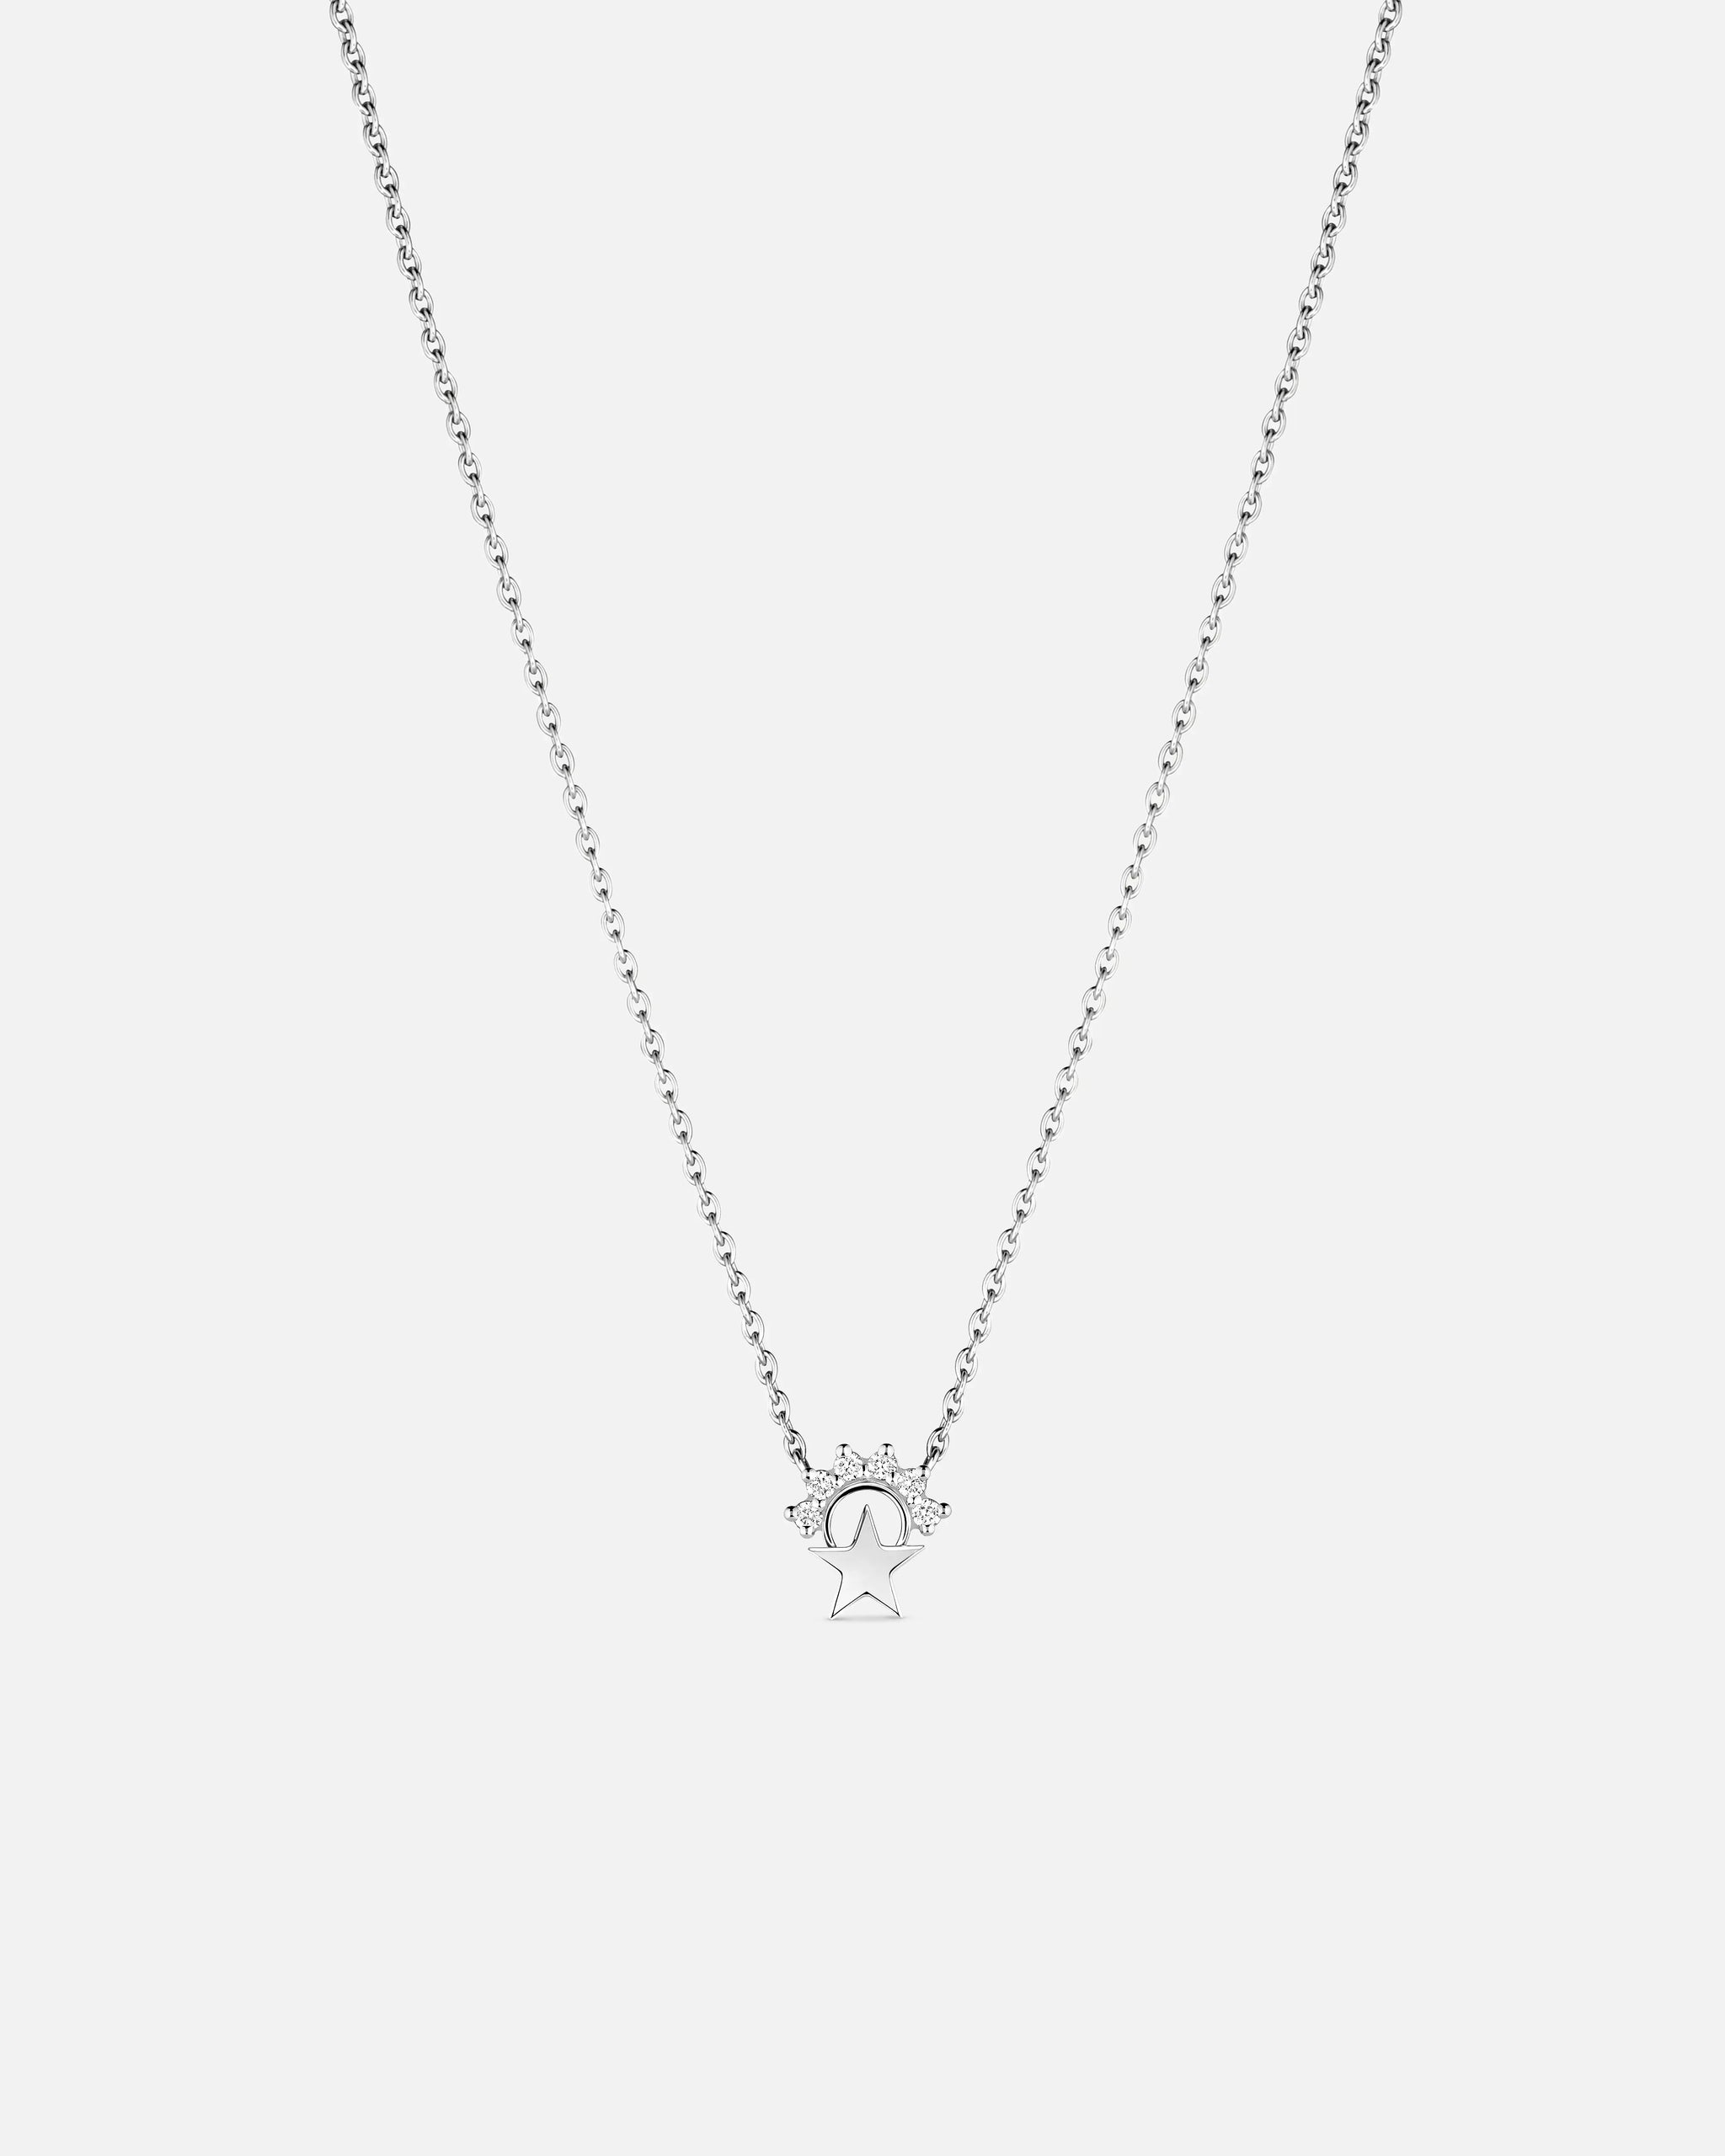 Small Star Pendant in White Gold - 1 - Nouvel Heritage